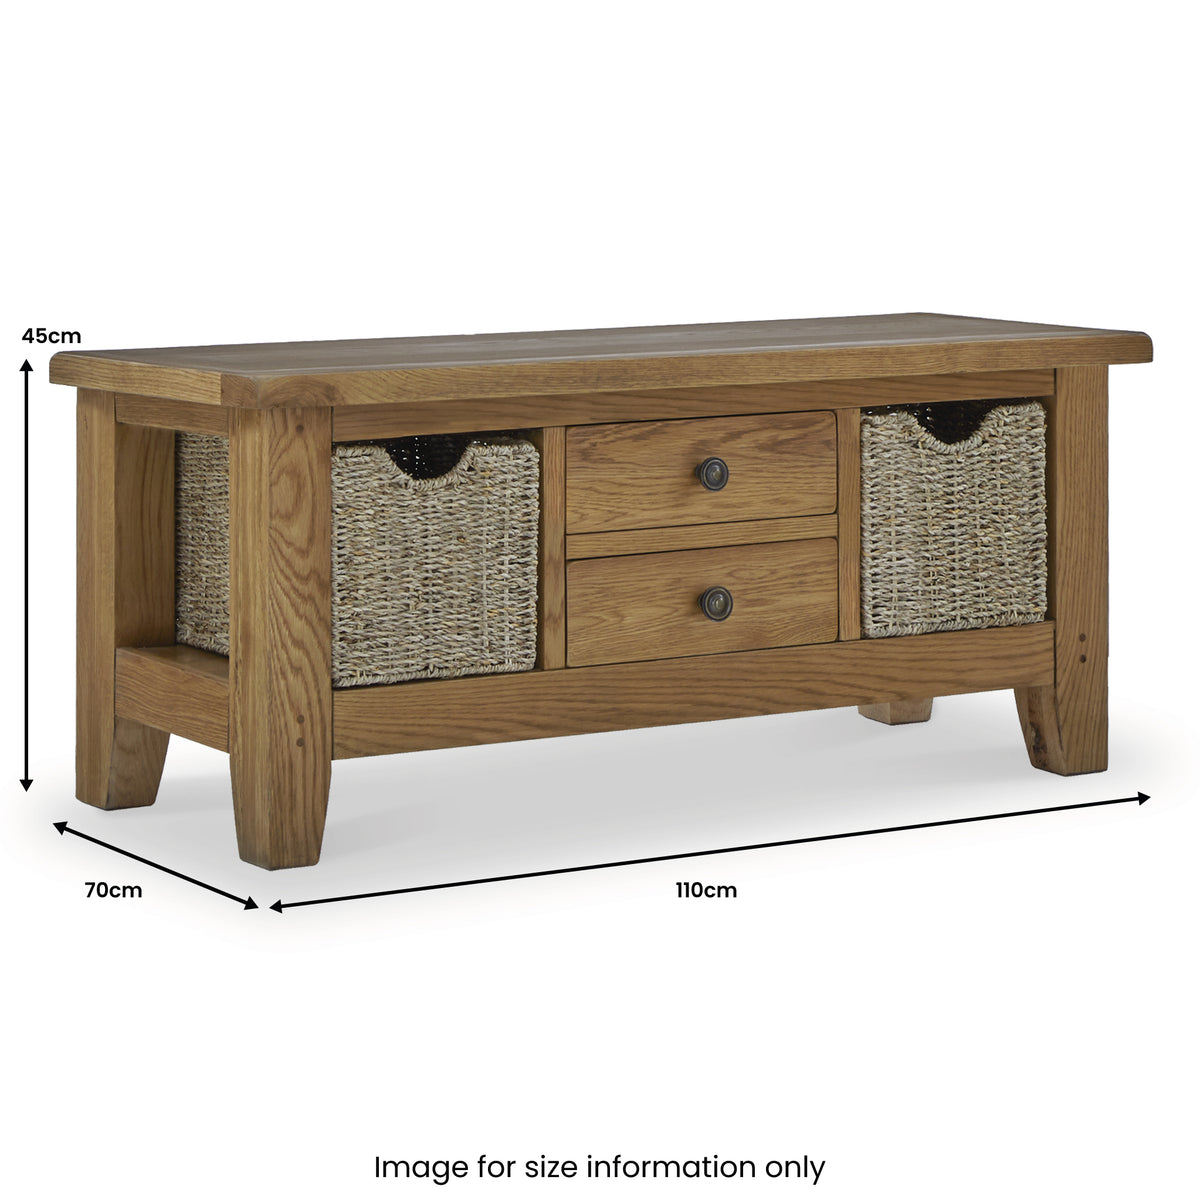 Broadway Oak Large Coffee Table with Baskets dimensions